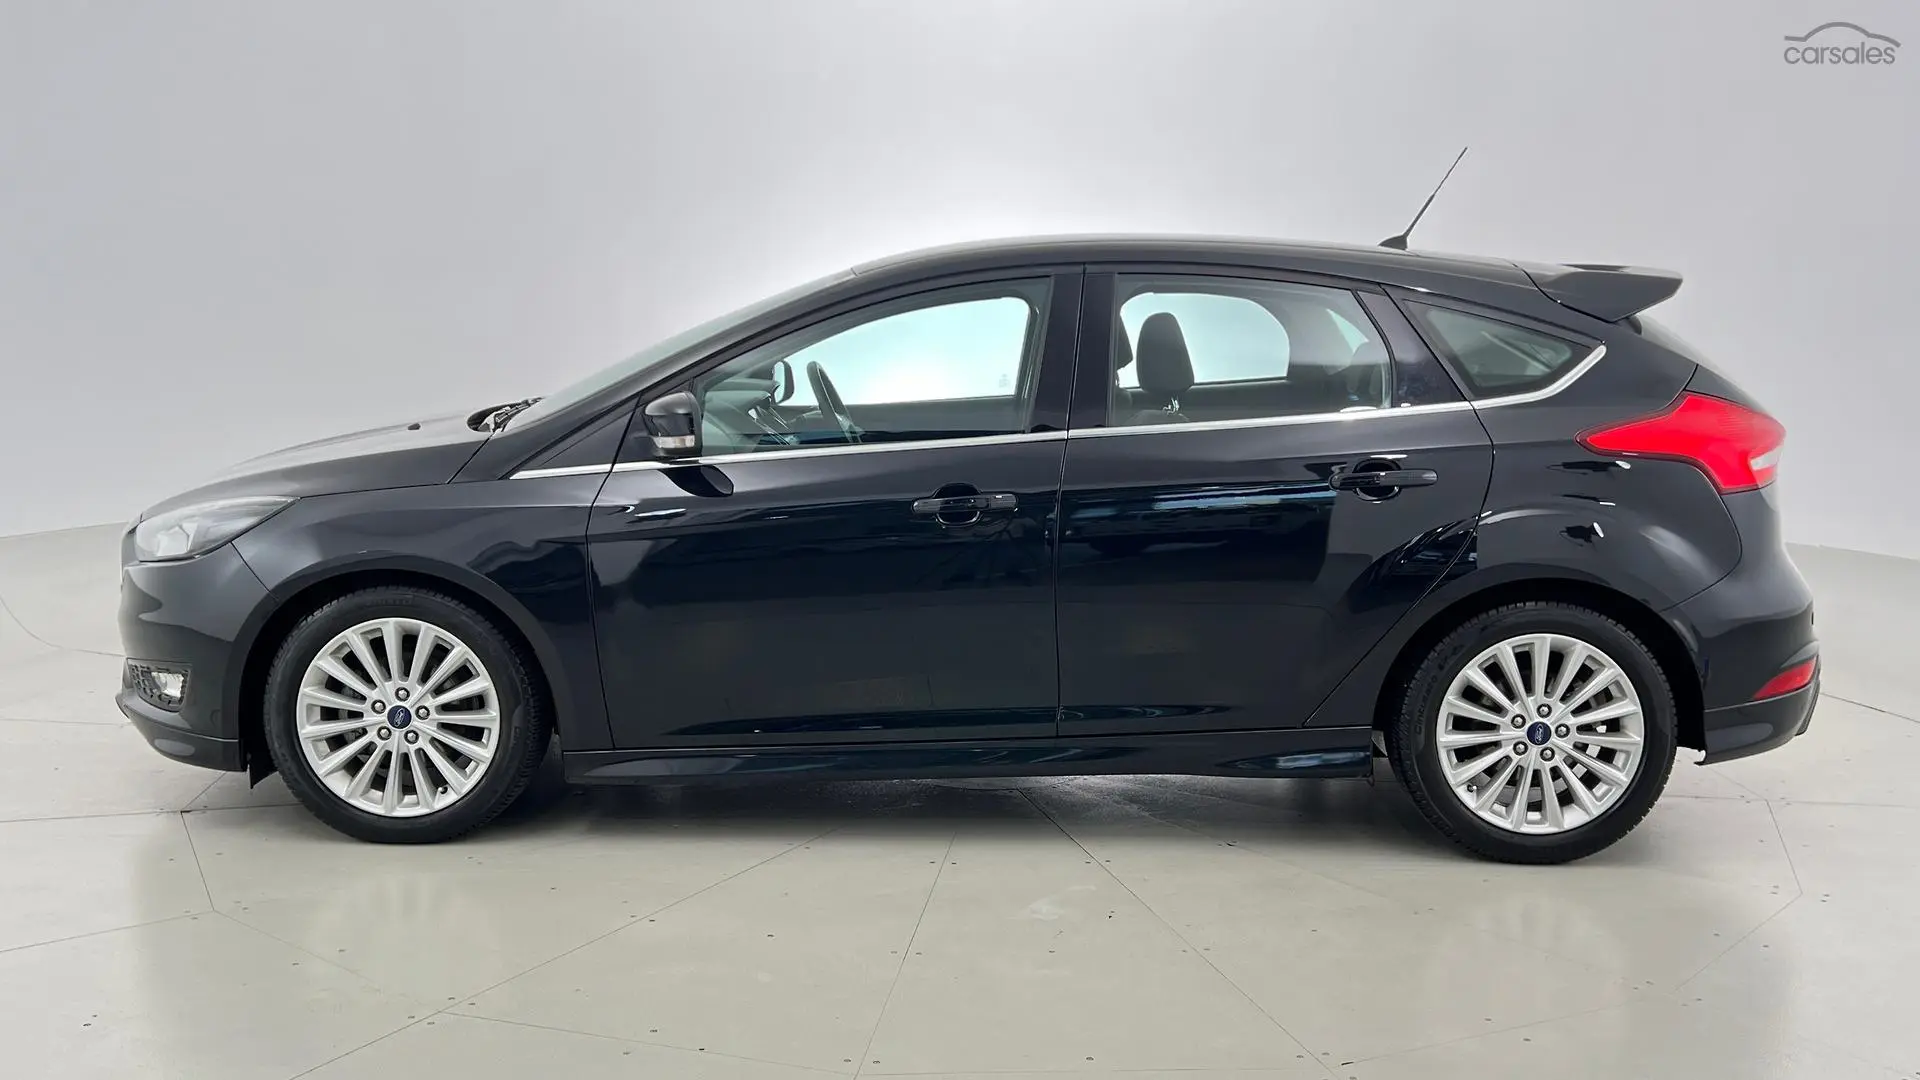 2015 Ford Focus Image 7